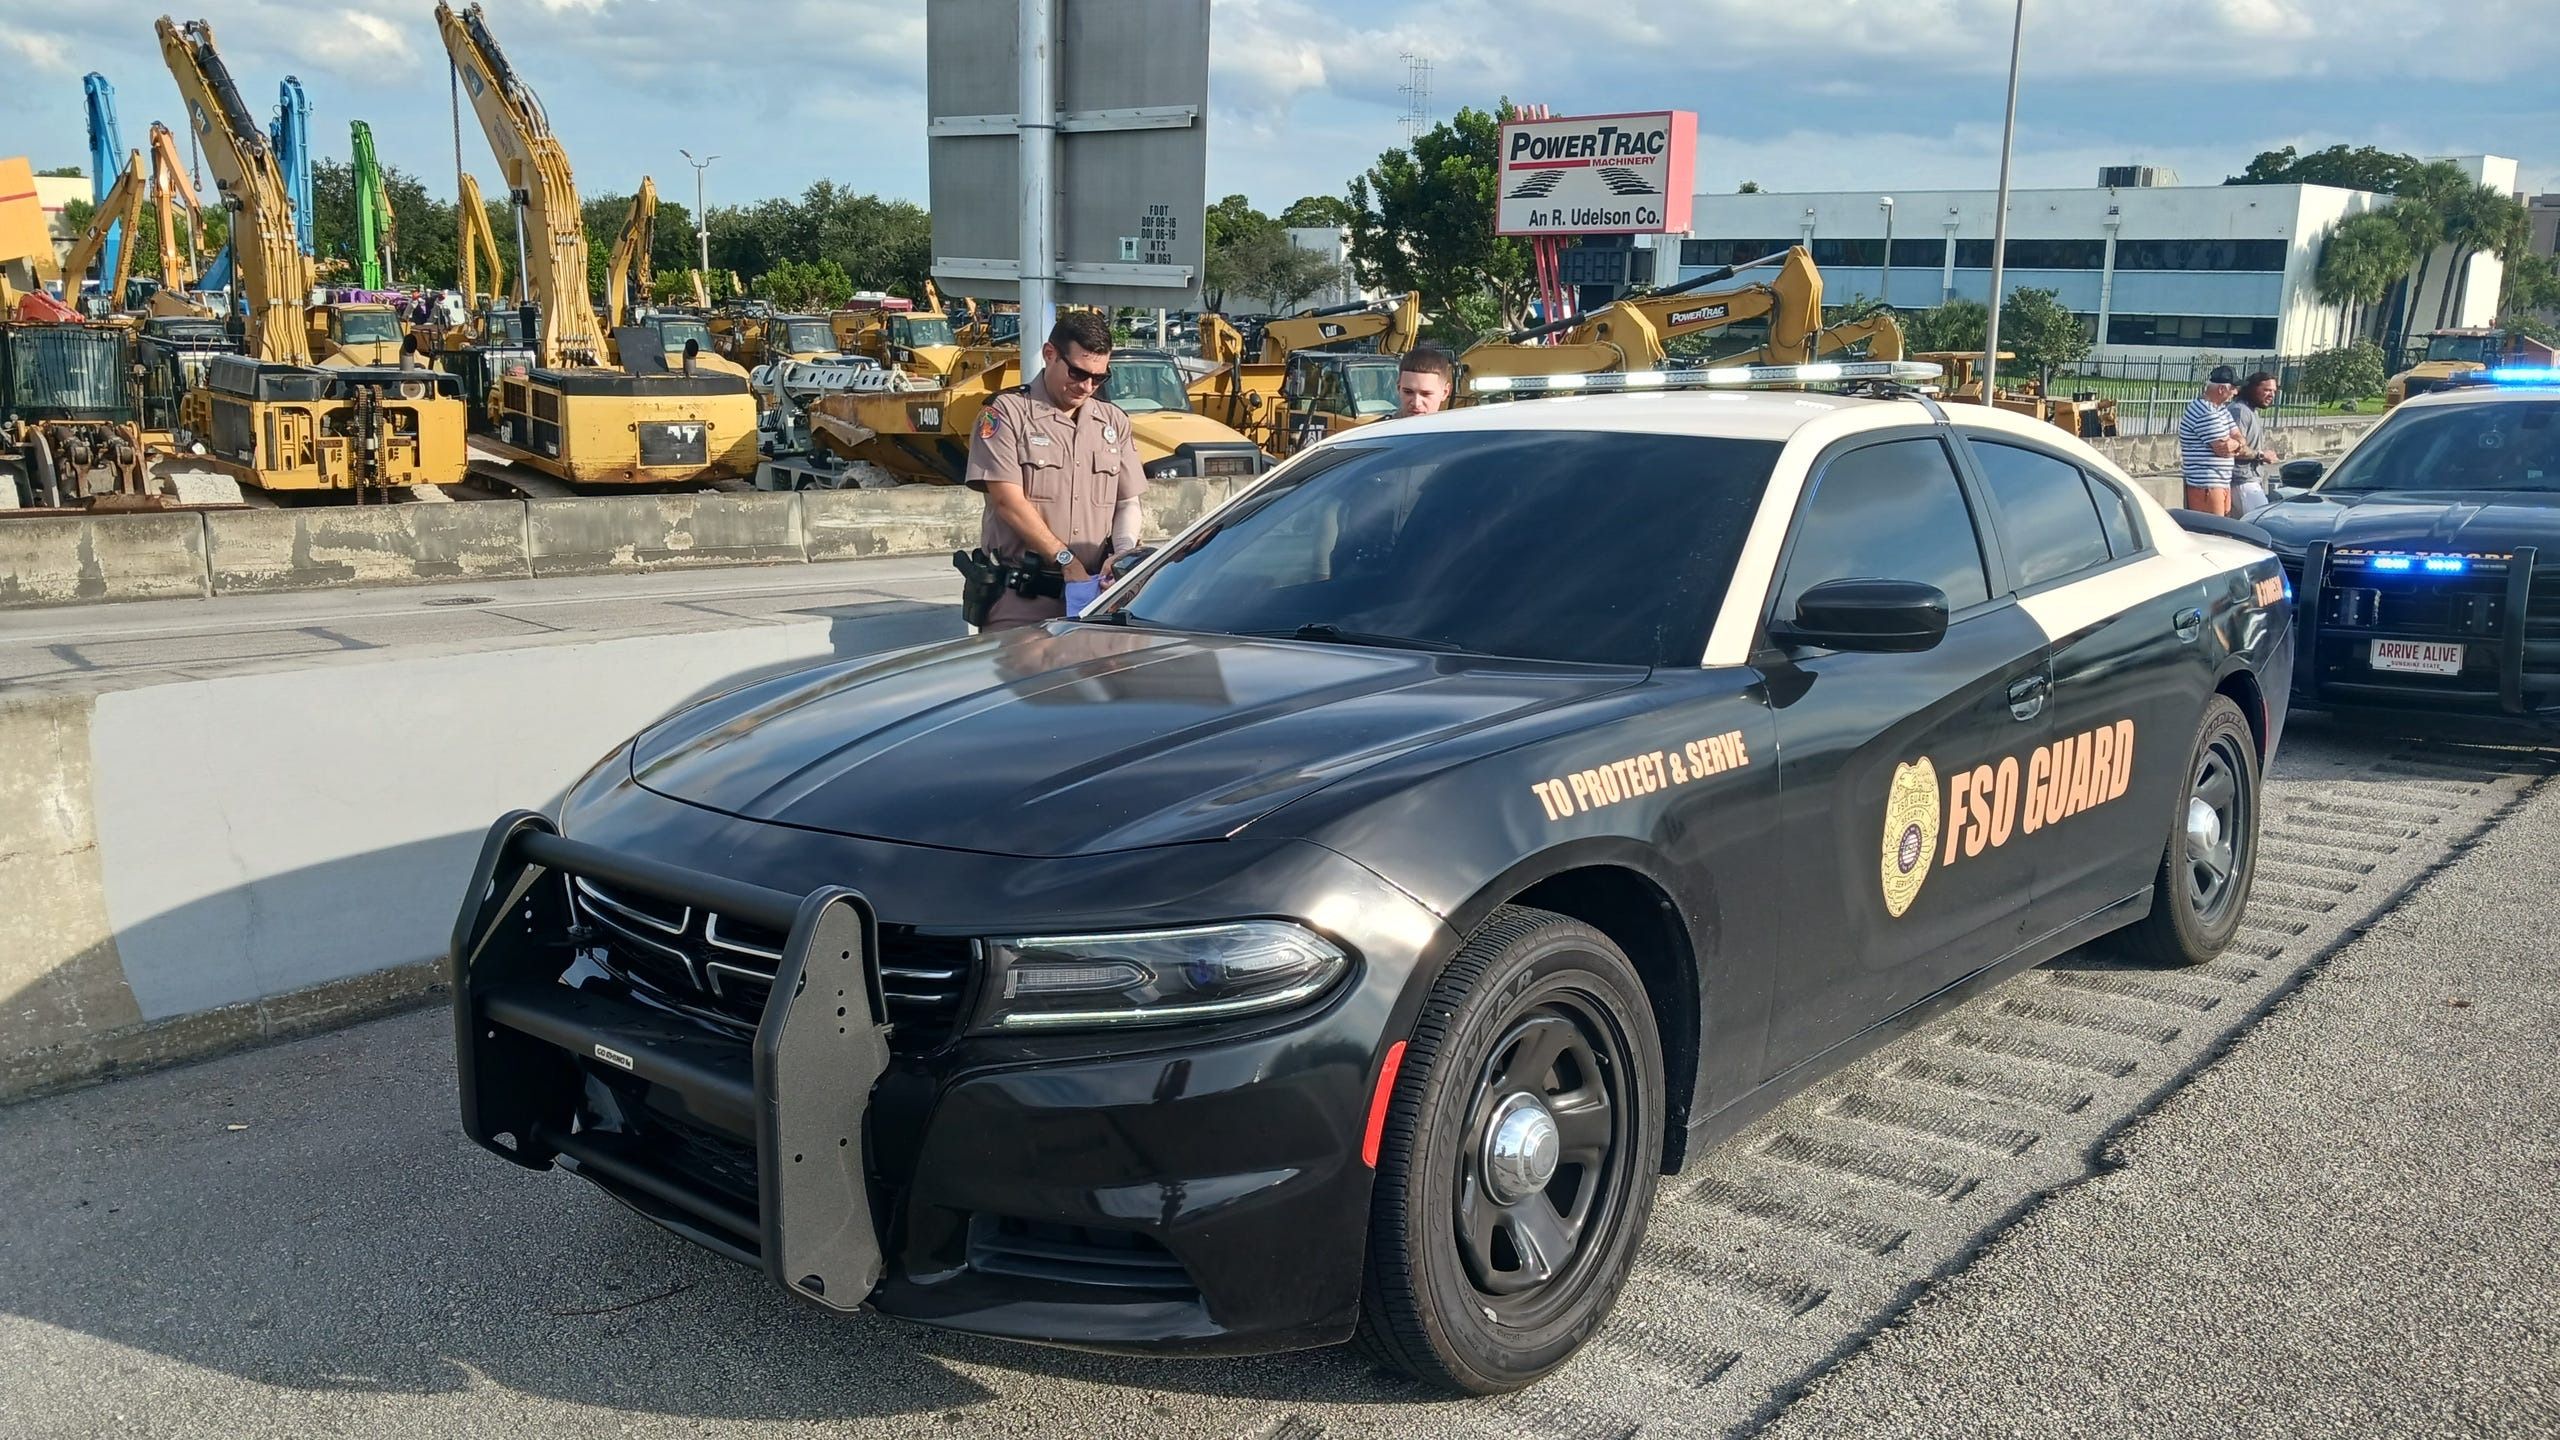 Florida Woman Arrested For Painting Car To Look Like Highway Patrol Car